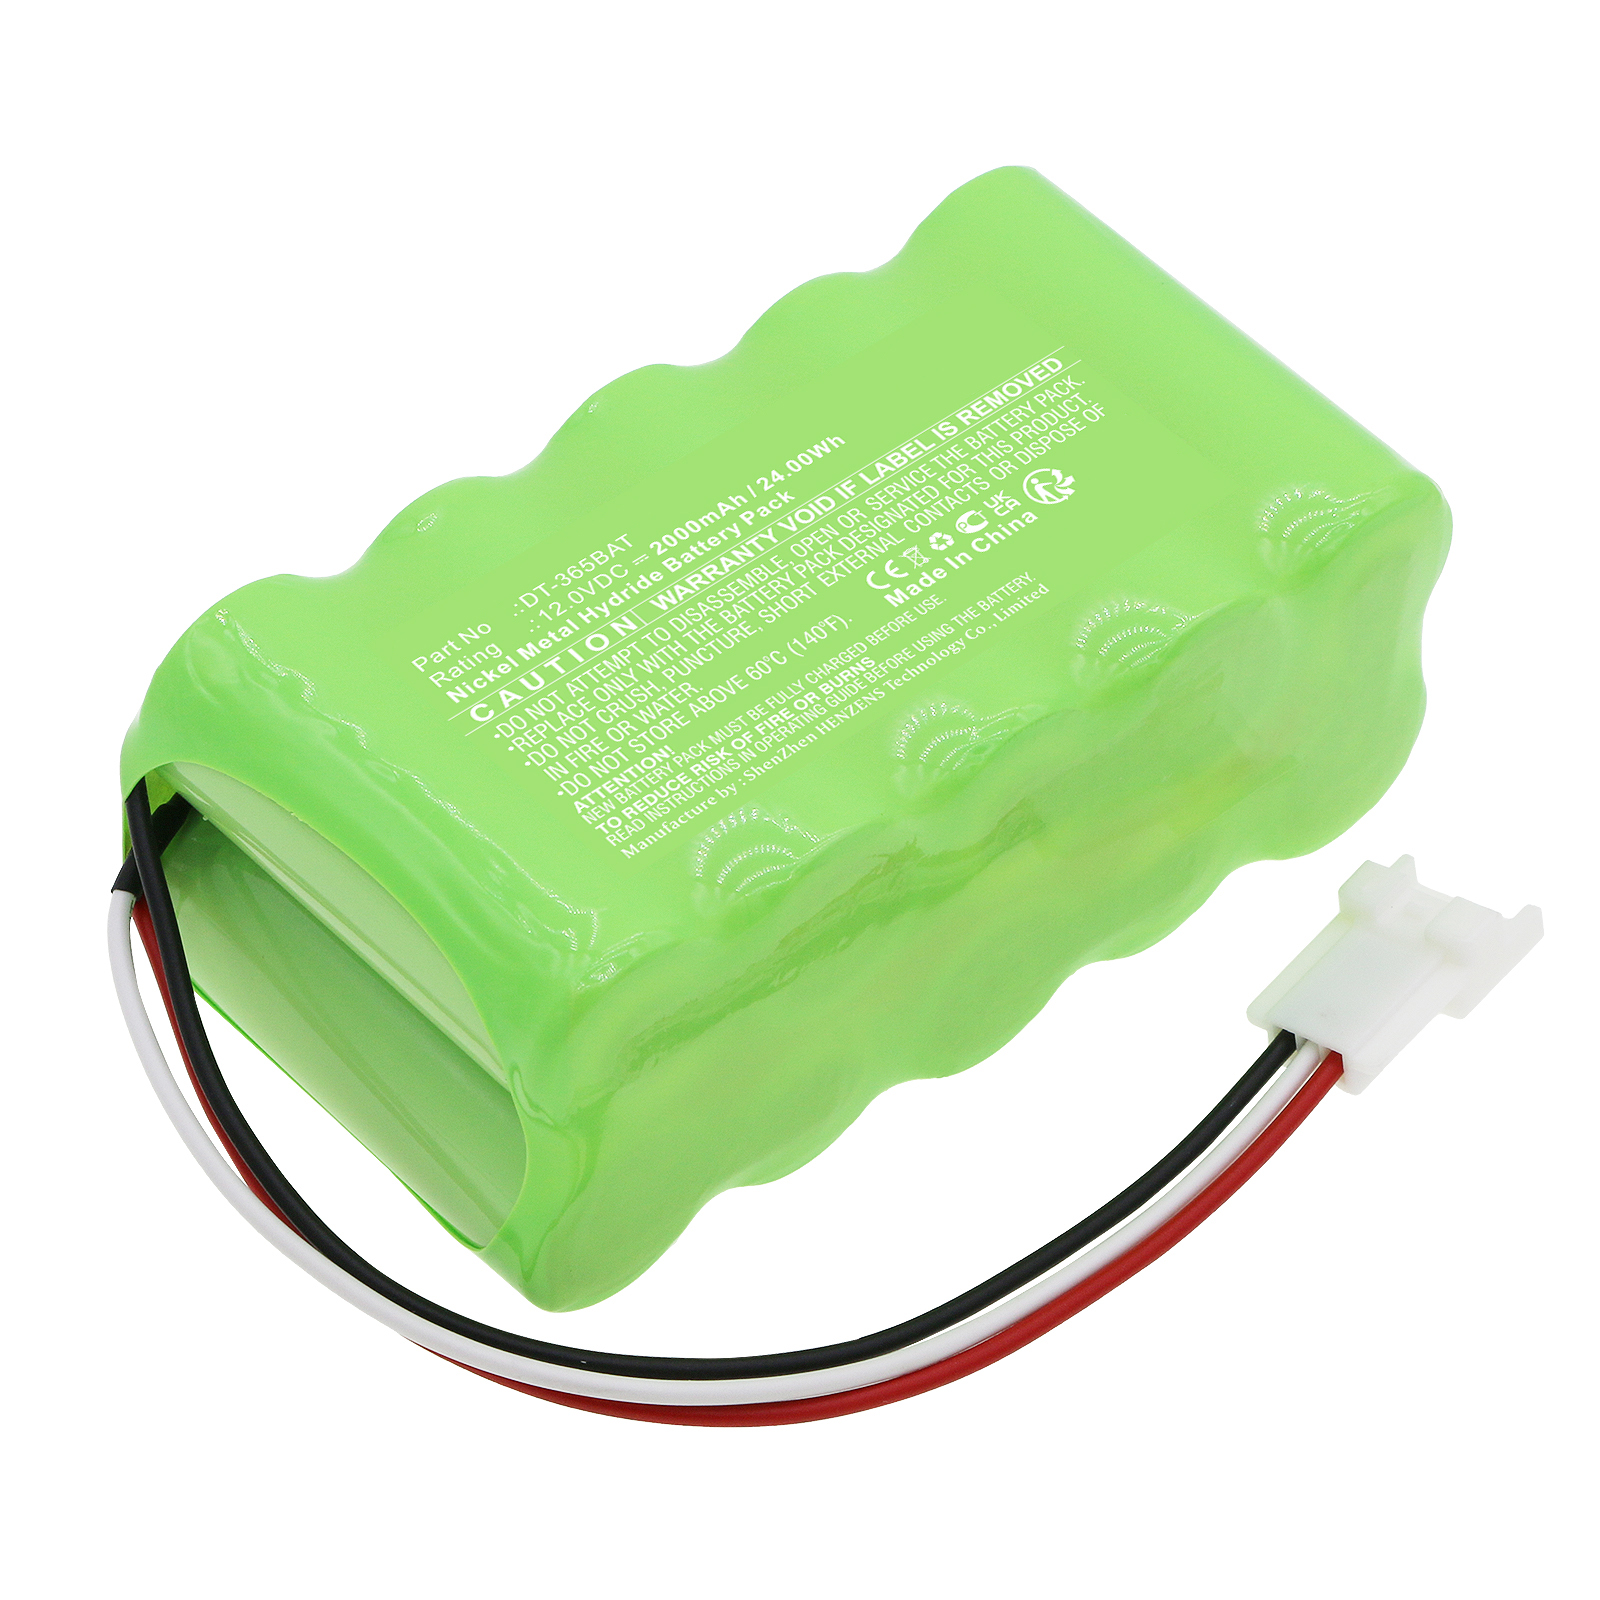 Synergy Digital Equipment Battery Compatible with Shimpo DT-365BAT Equipment Battery (Ni-MH, 12V, 2000mAh)